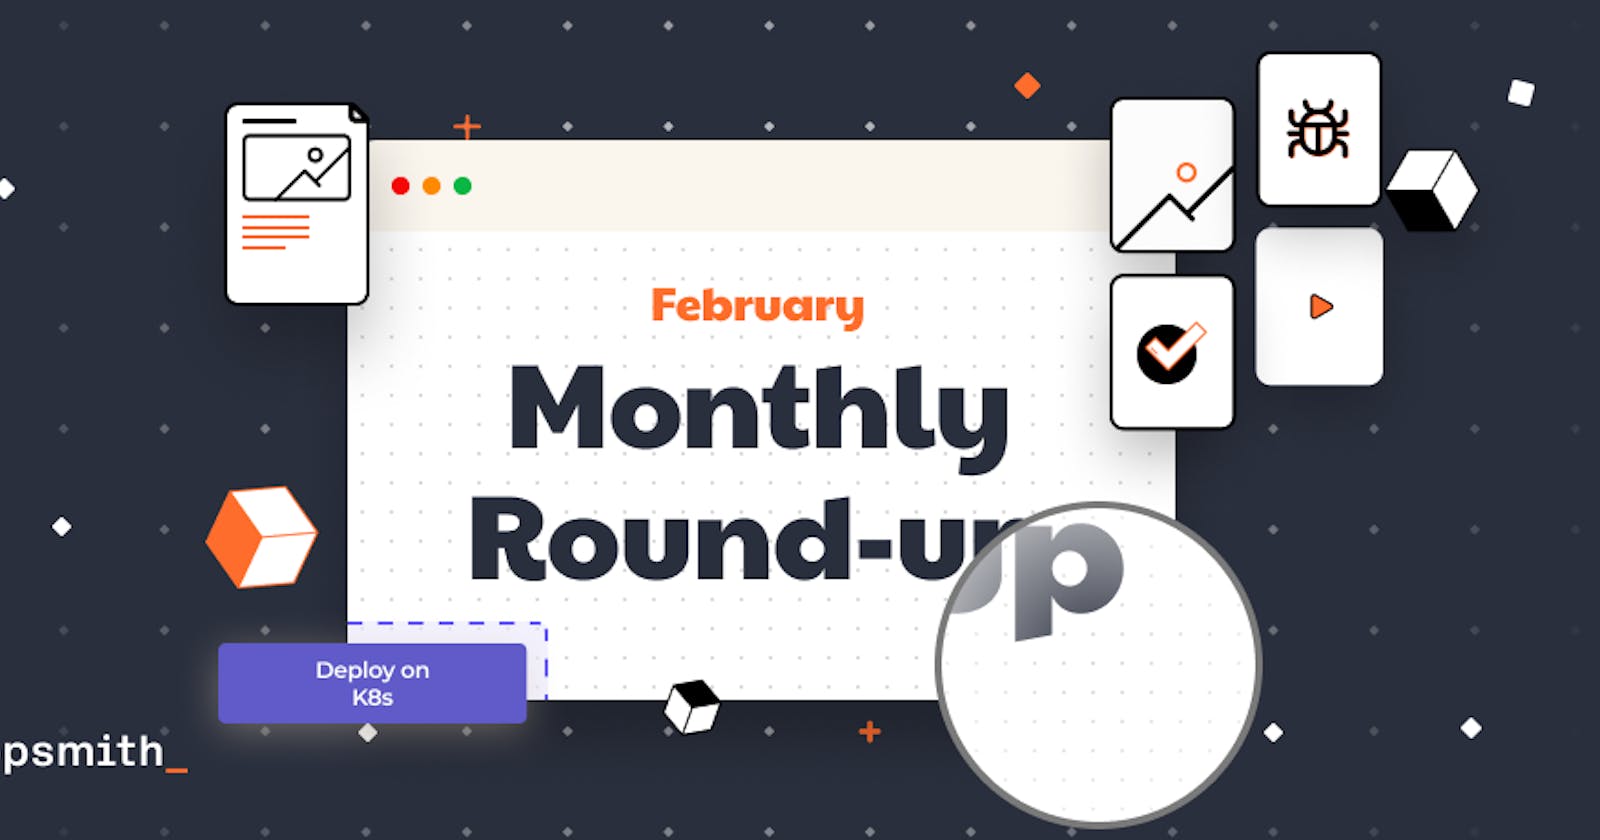 February Round-up: Helm Charts, Product Updates, and Collabs